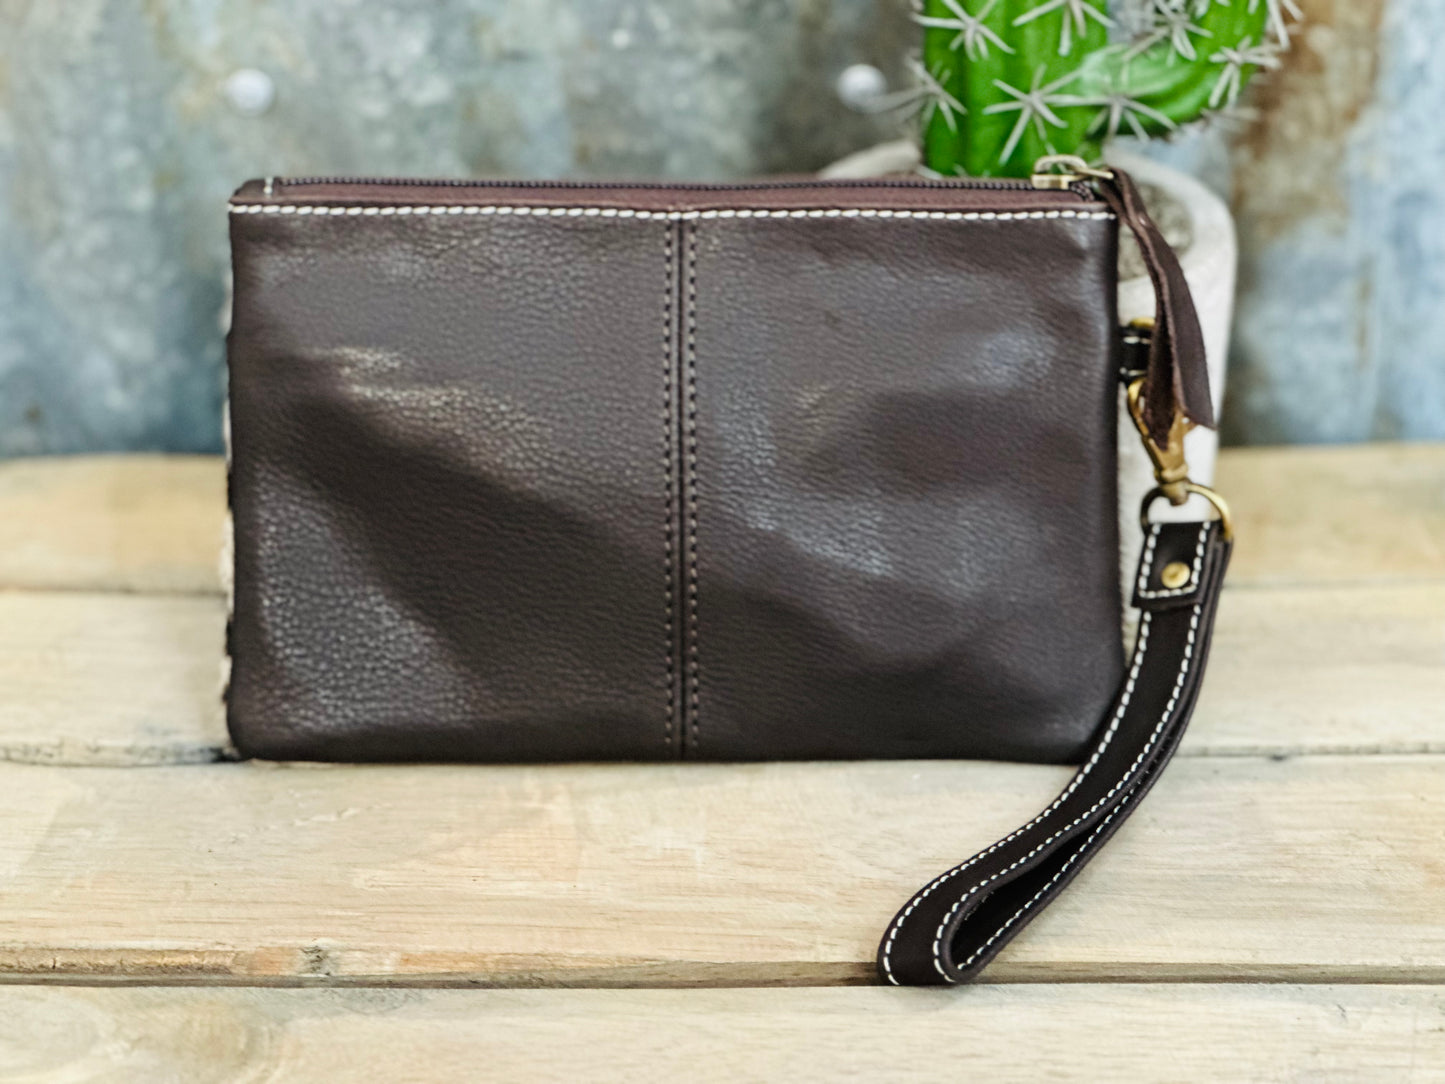 Cowhide Clutch with Tooling Details